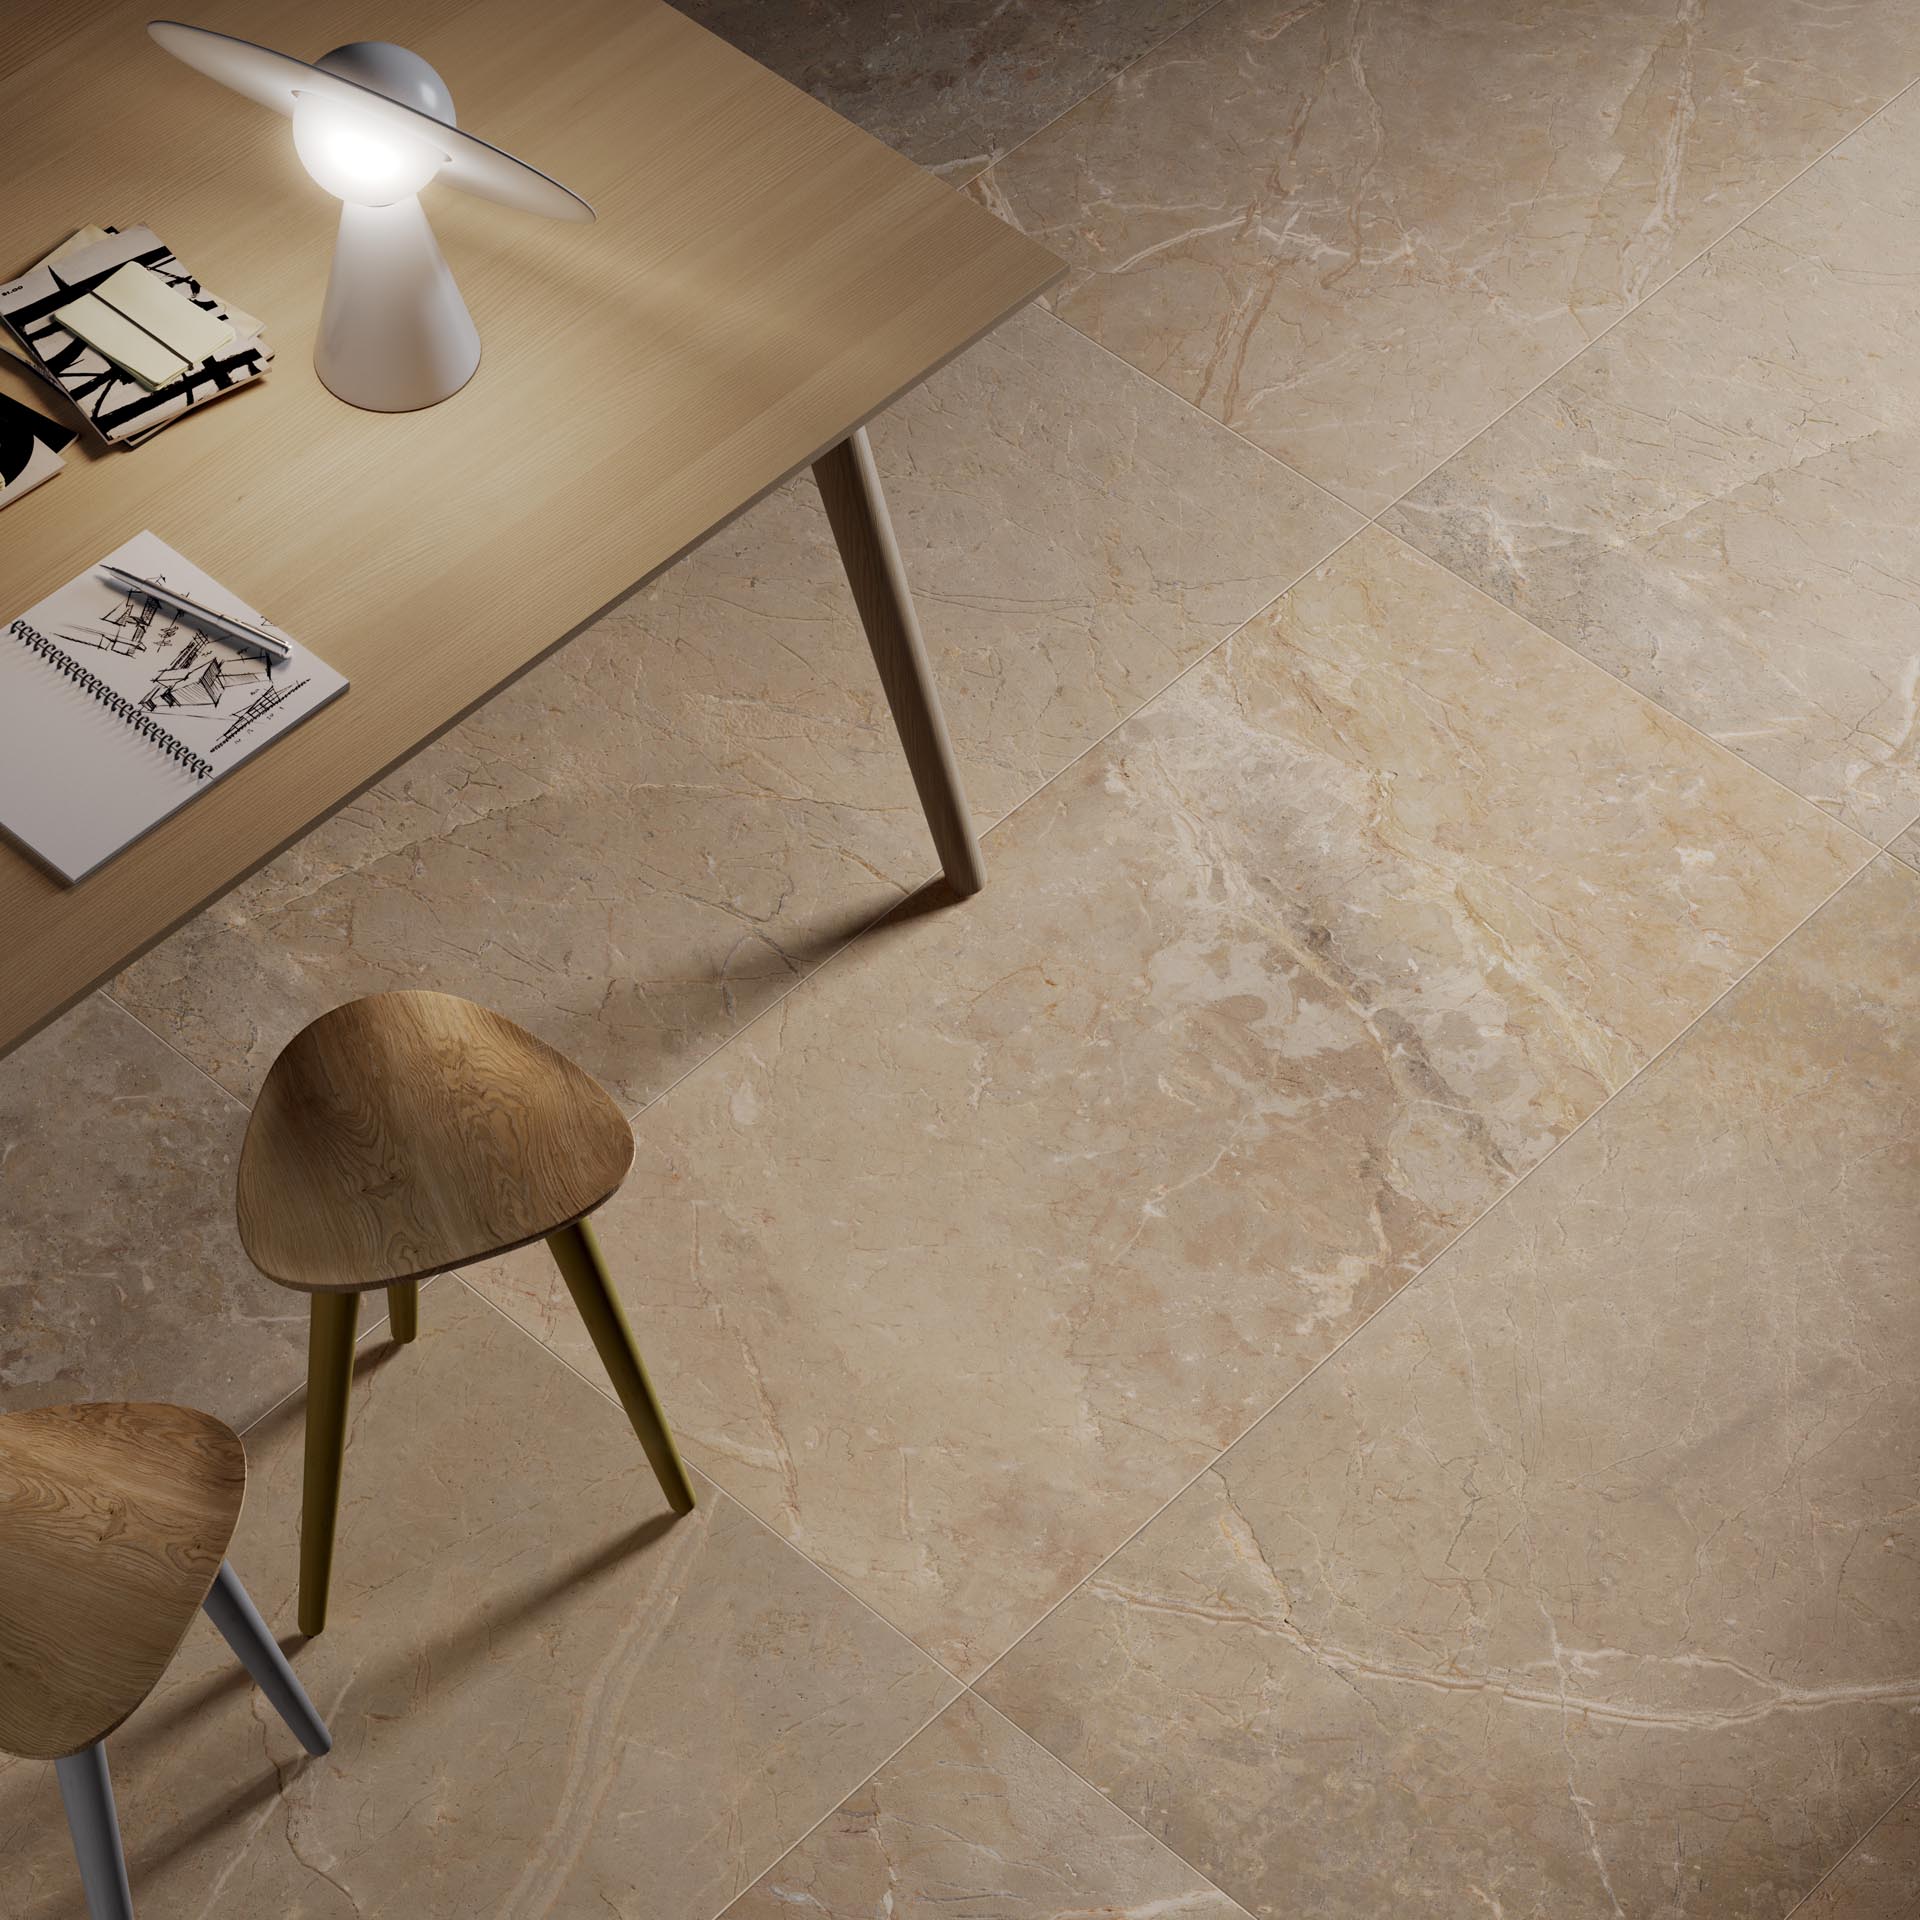 Earthy tiles with a natural tone that's inspired by Fall (Autumn).